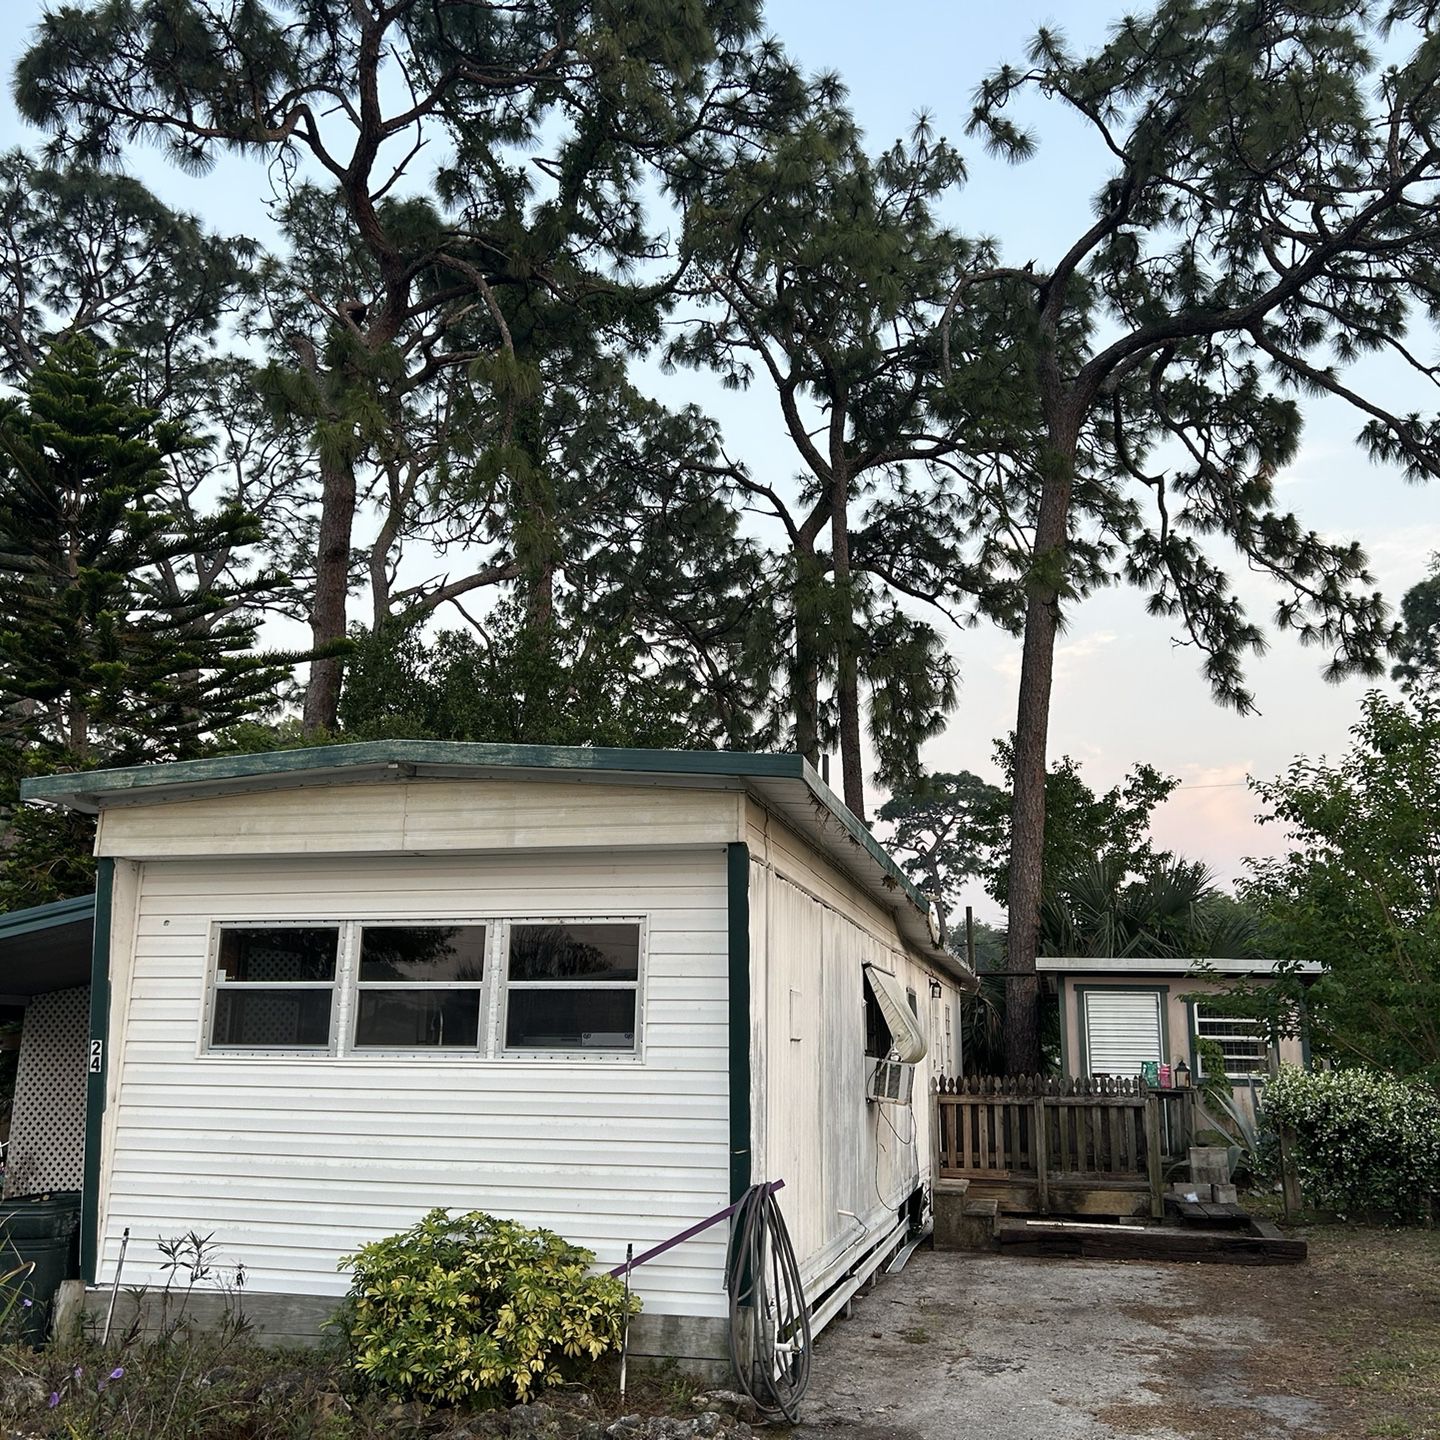 Cheap Mobile Home For Sale ( Owner May Finance)